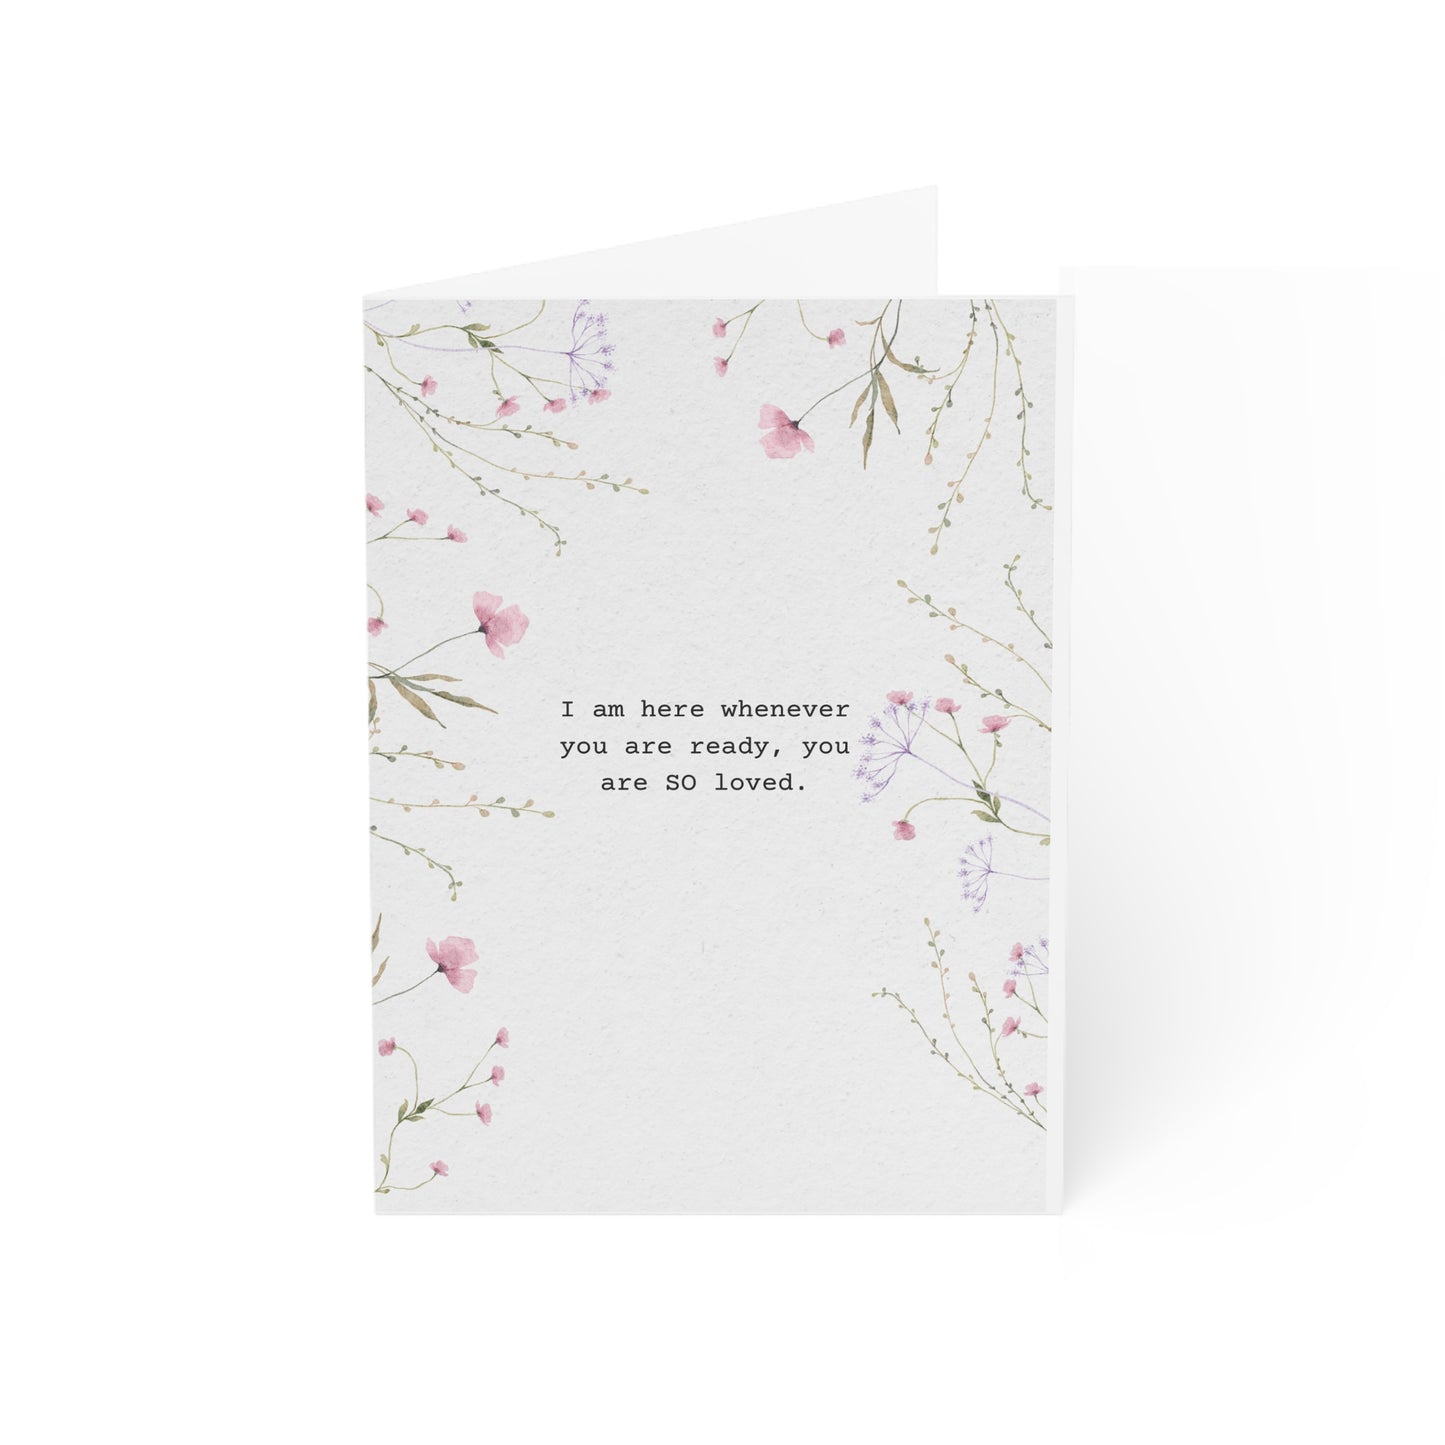 I am here whenever you need - Greeting Cards (1, 10, 30, and 50pcs)